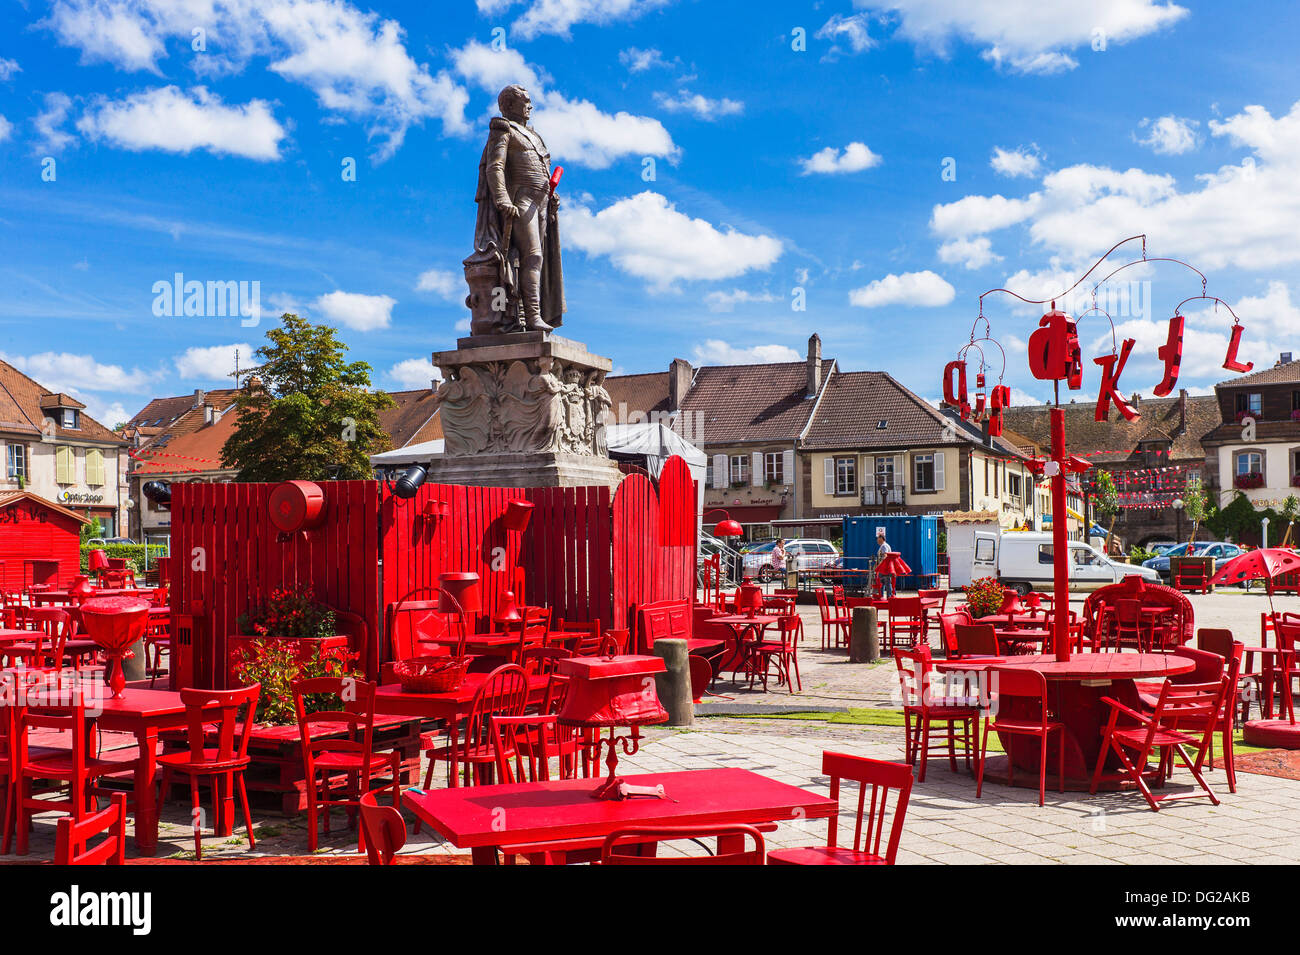 Theatre Festival decoration with Marshal Georges Mouton statue Place d'Armes square Phalsbourg Alsace France Europe Stock Photo